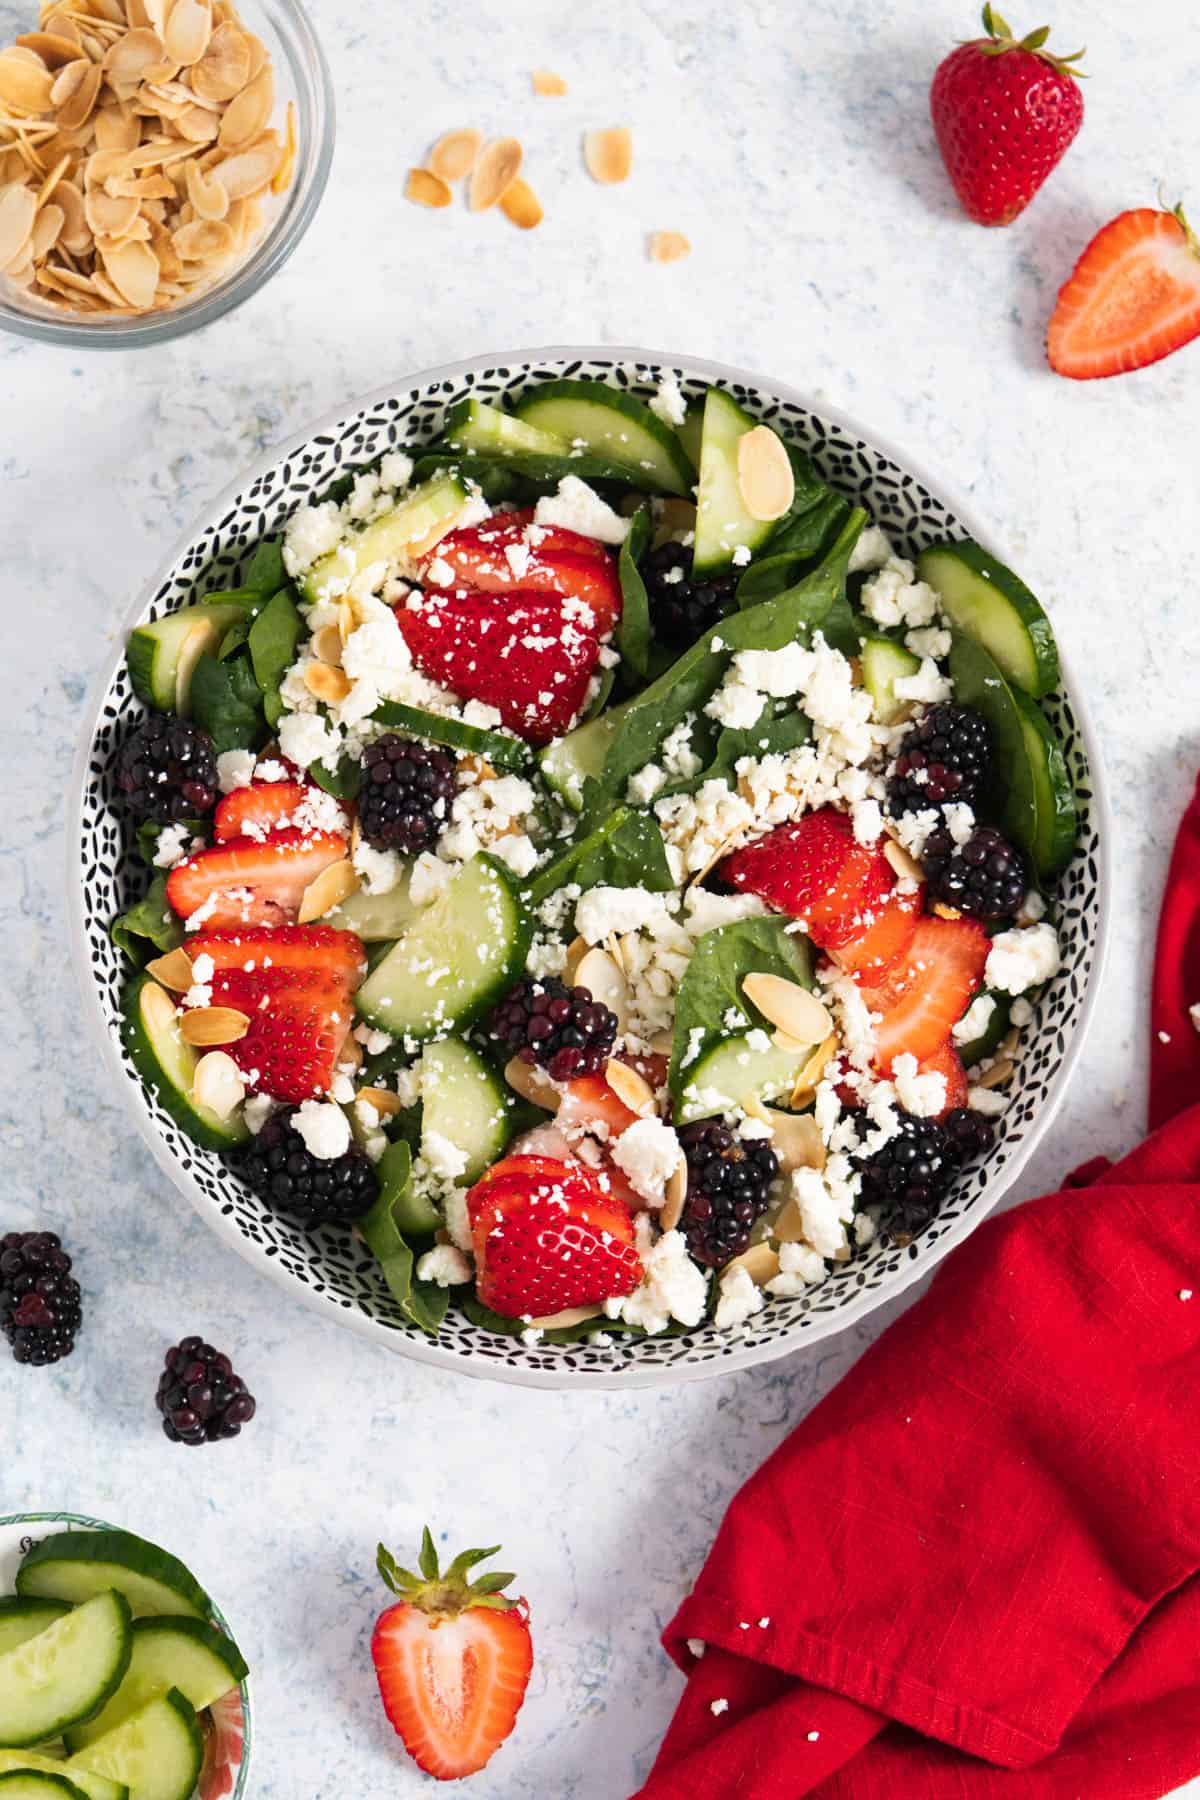 Spinach and strawberry salad in a round dish with some sliced strawberries on the side, toasted almonds and a red napkin.